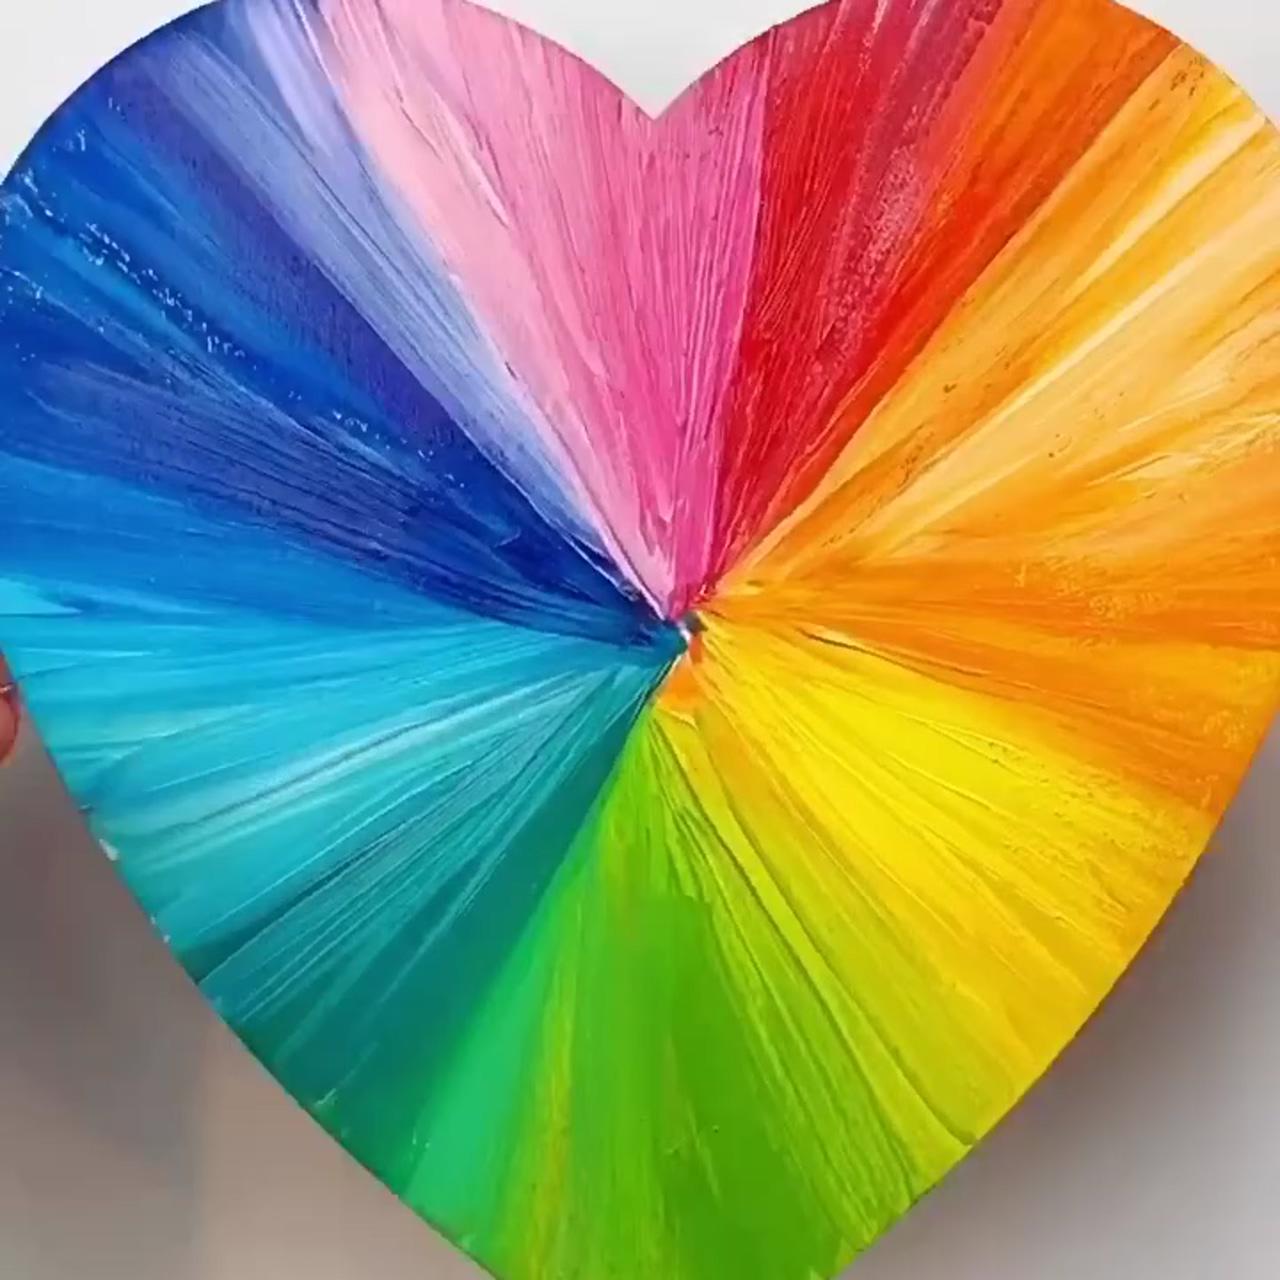 Abstract heart art project; color wheel art projects